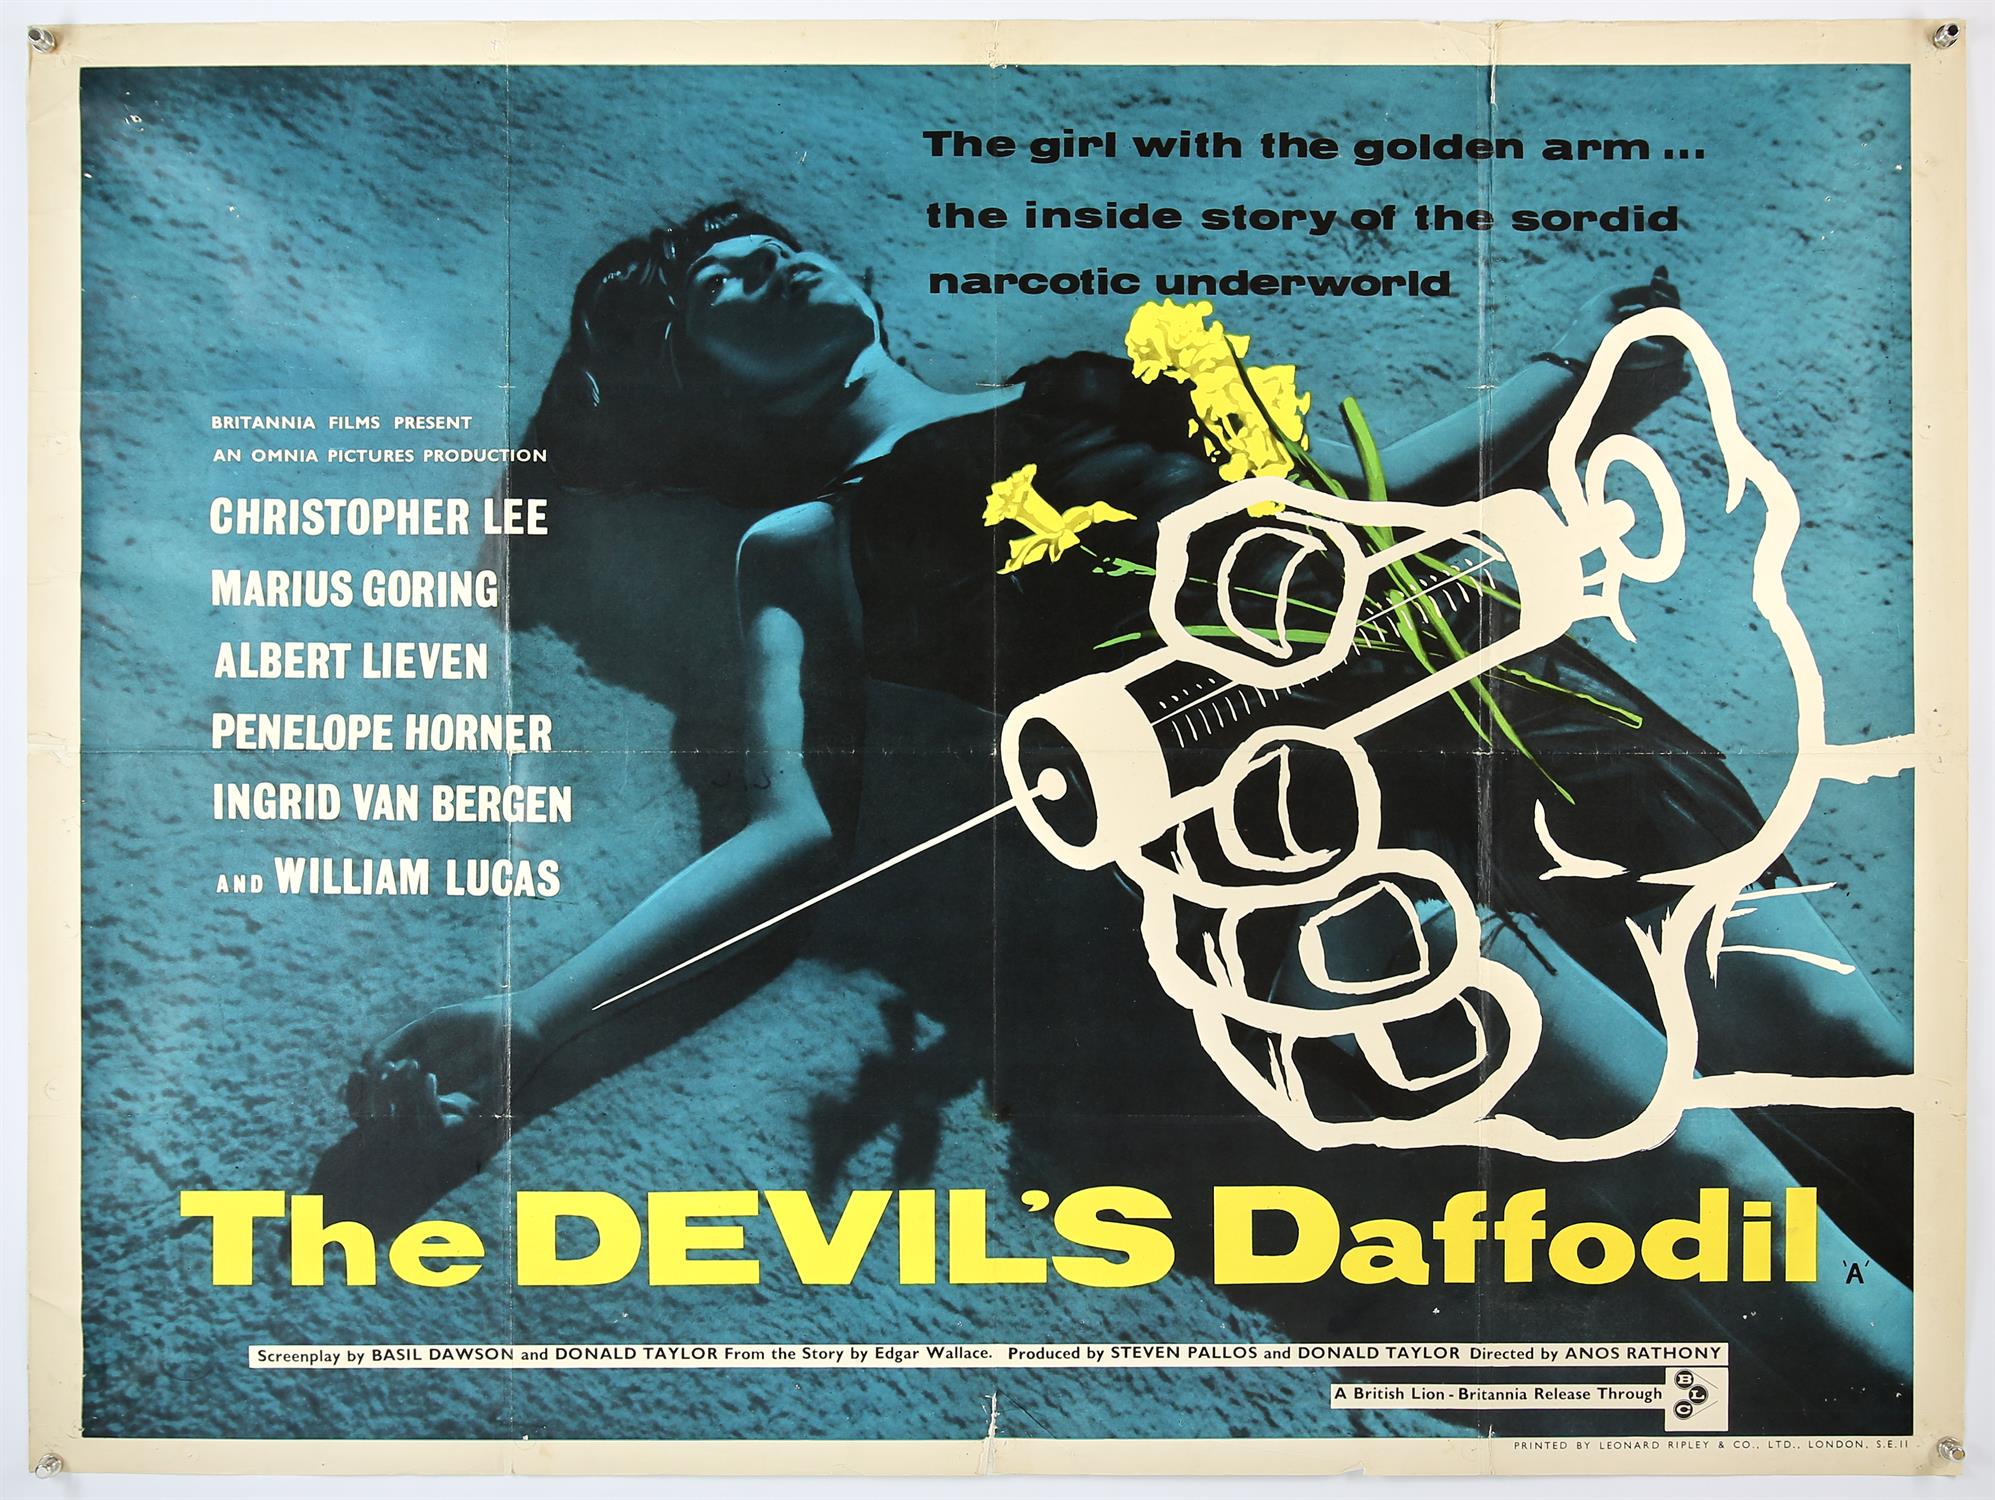 The Devils Daffodil (1961) British Quad film poster, for the Anglo-German crime drama with a drugs